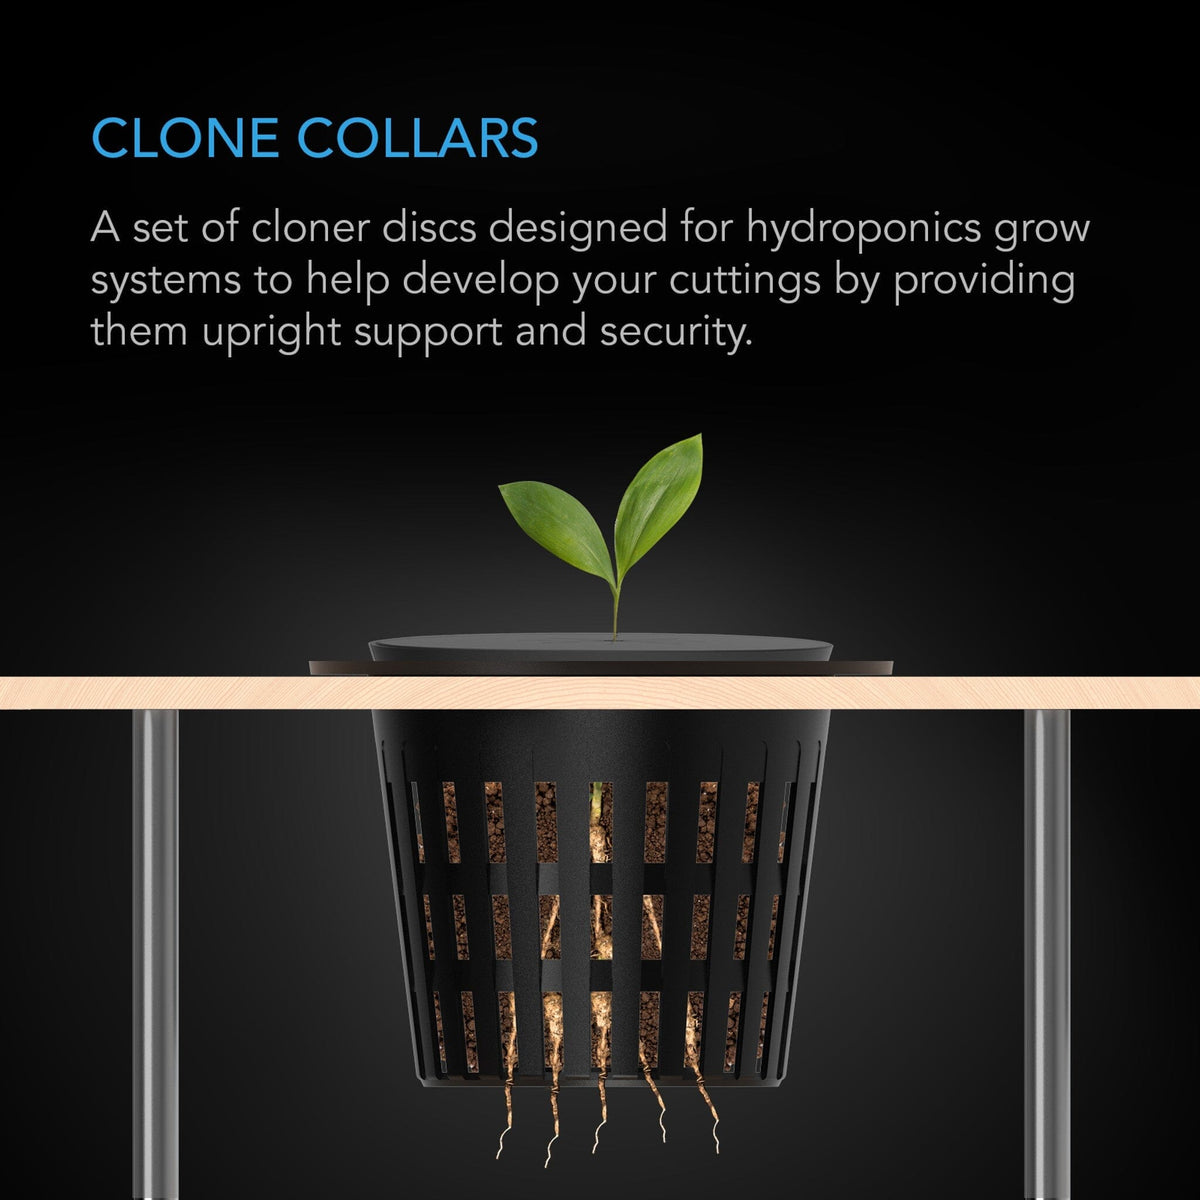 Clone collars for cuttings